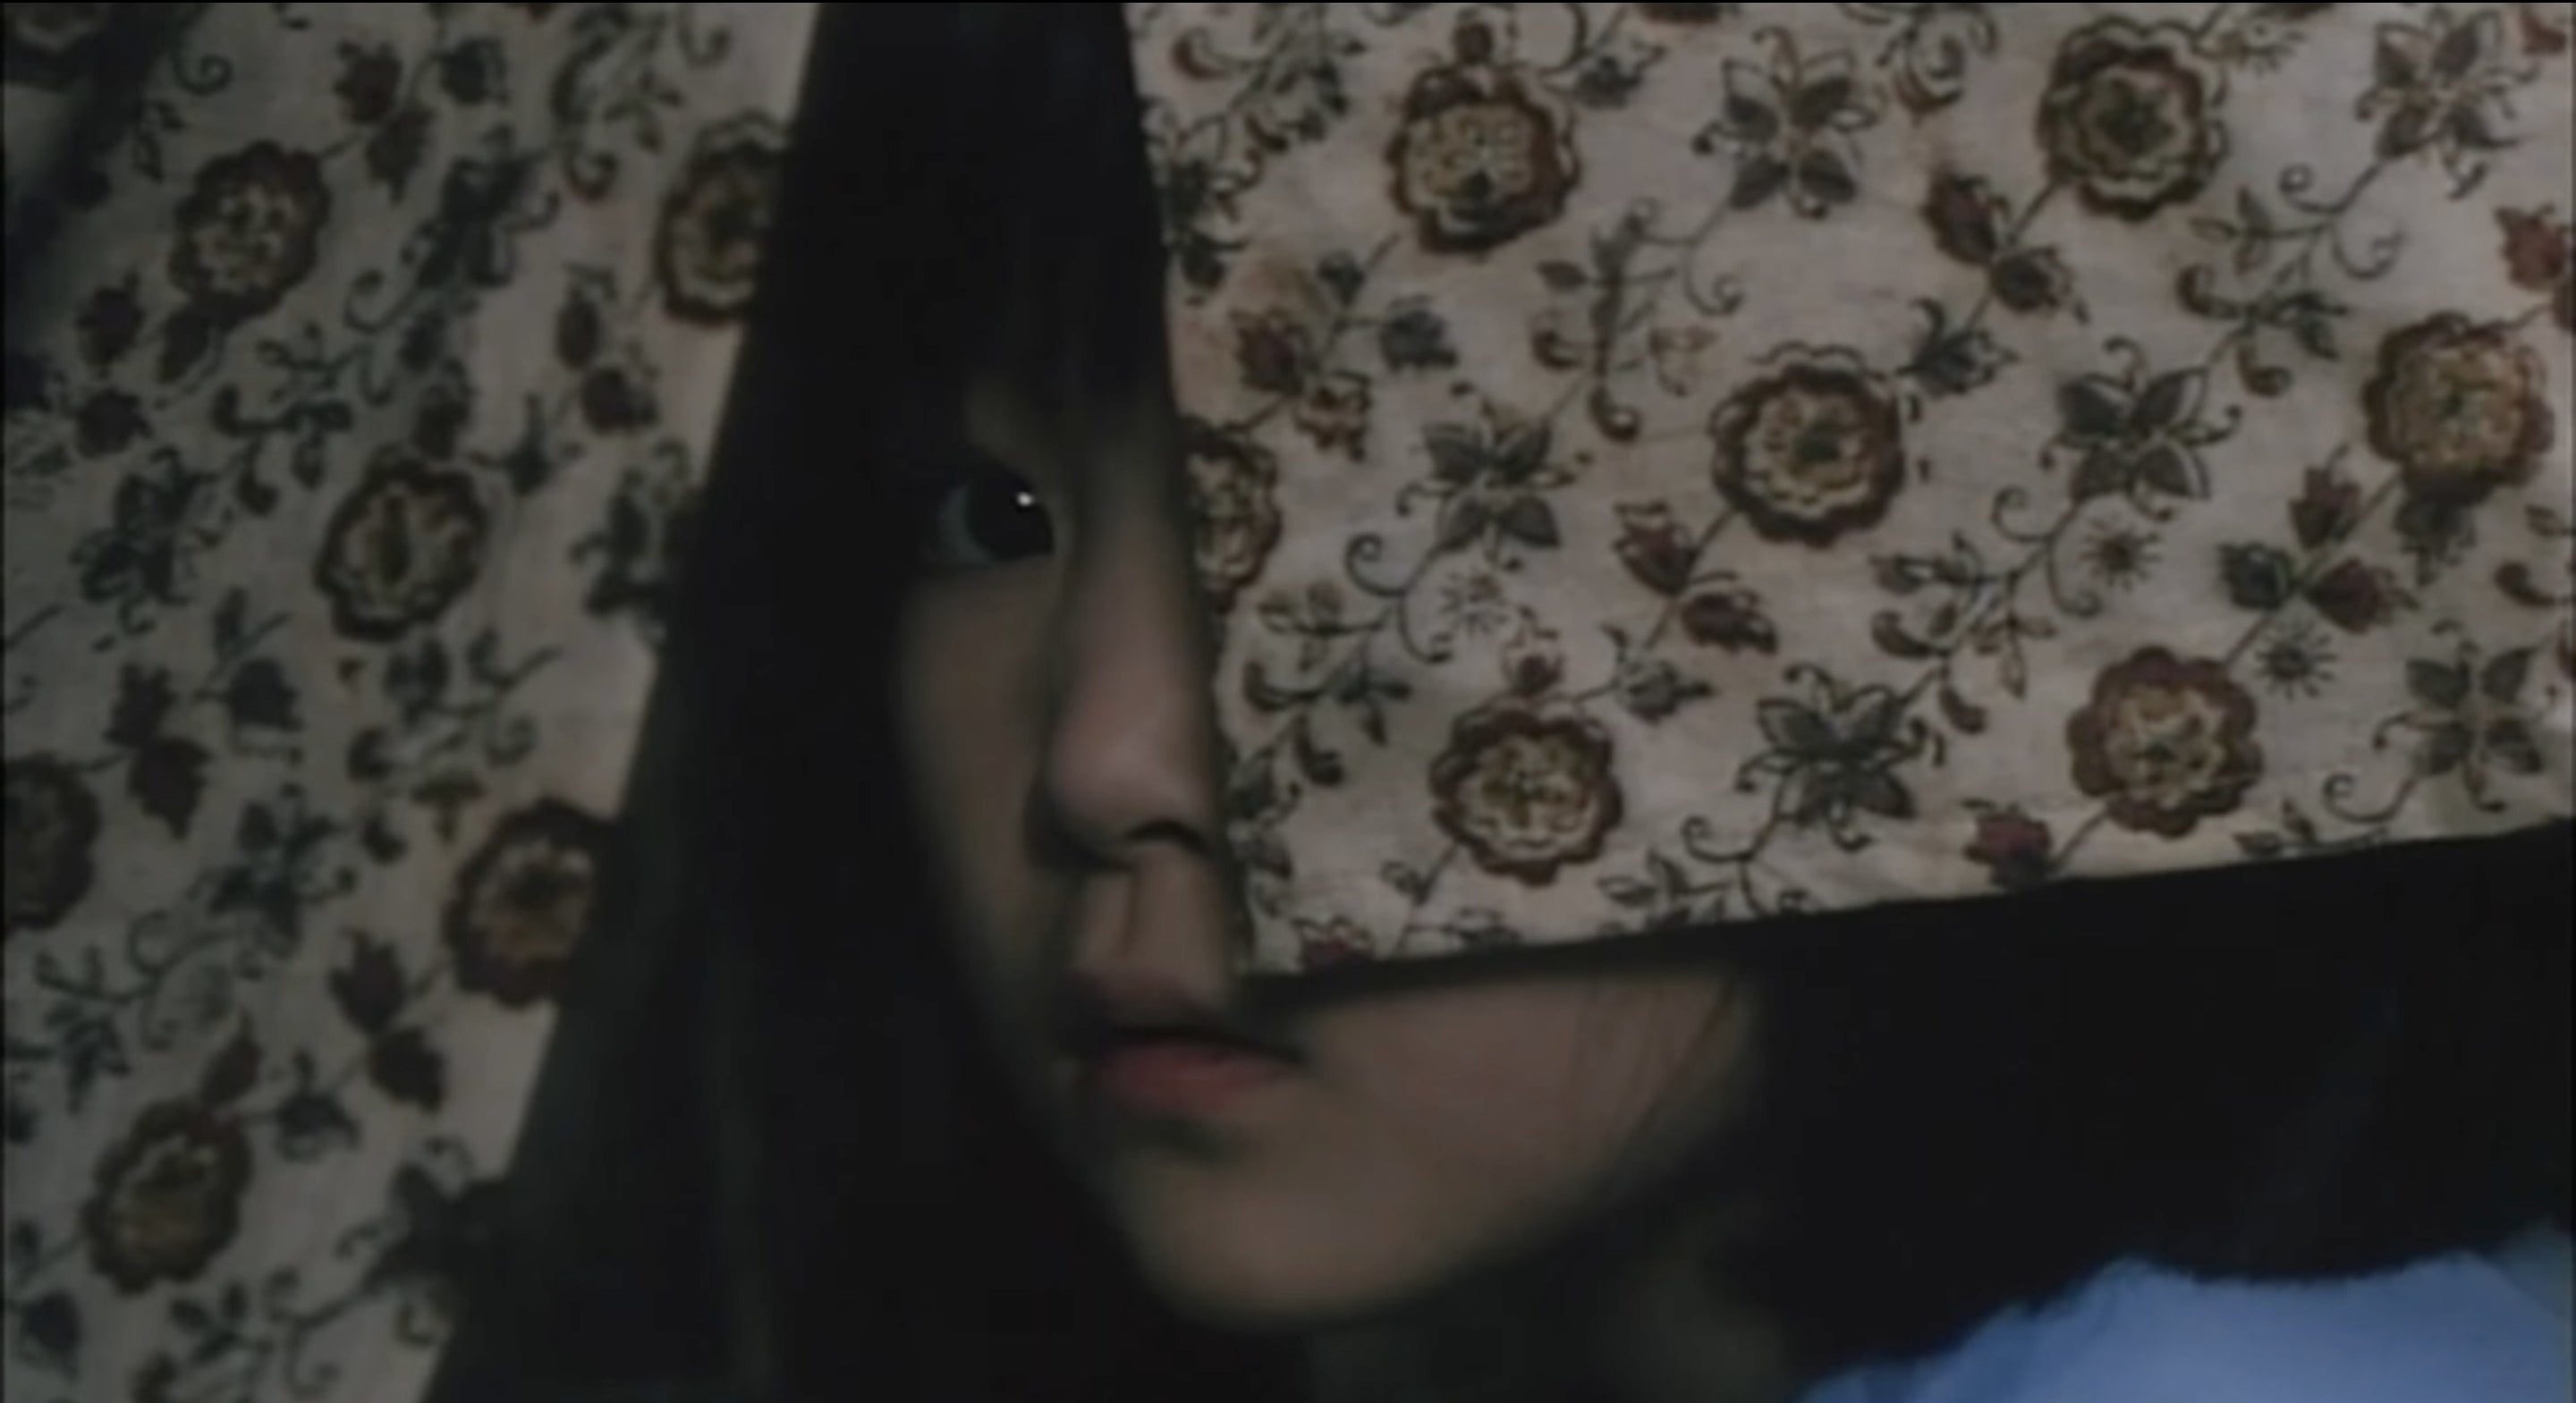 A scared-looking child whose face is partially covered